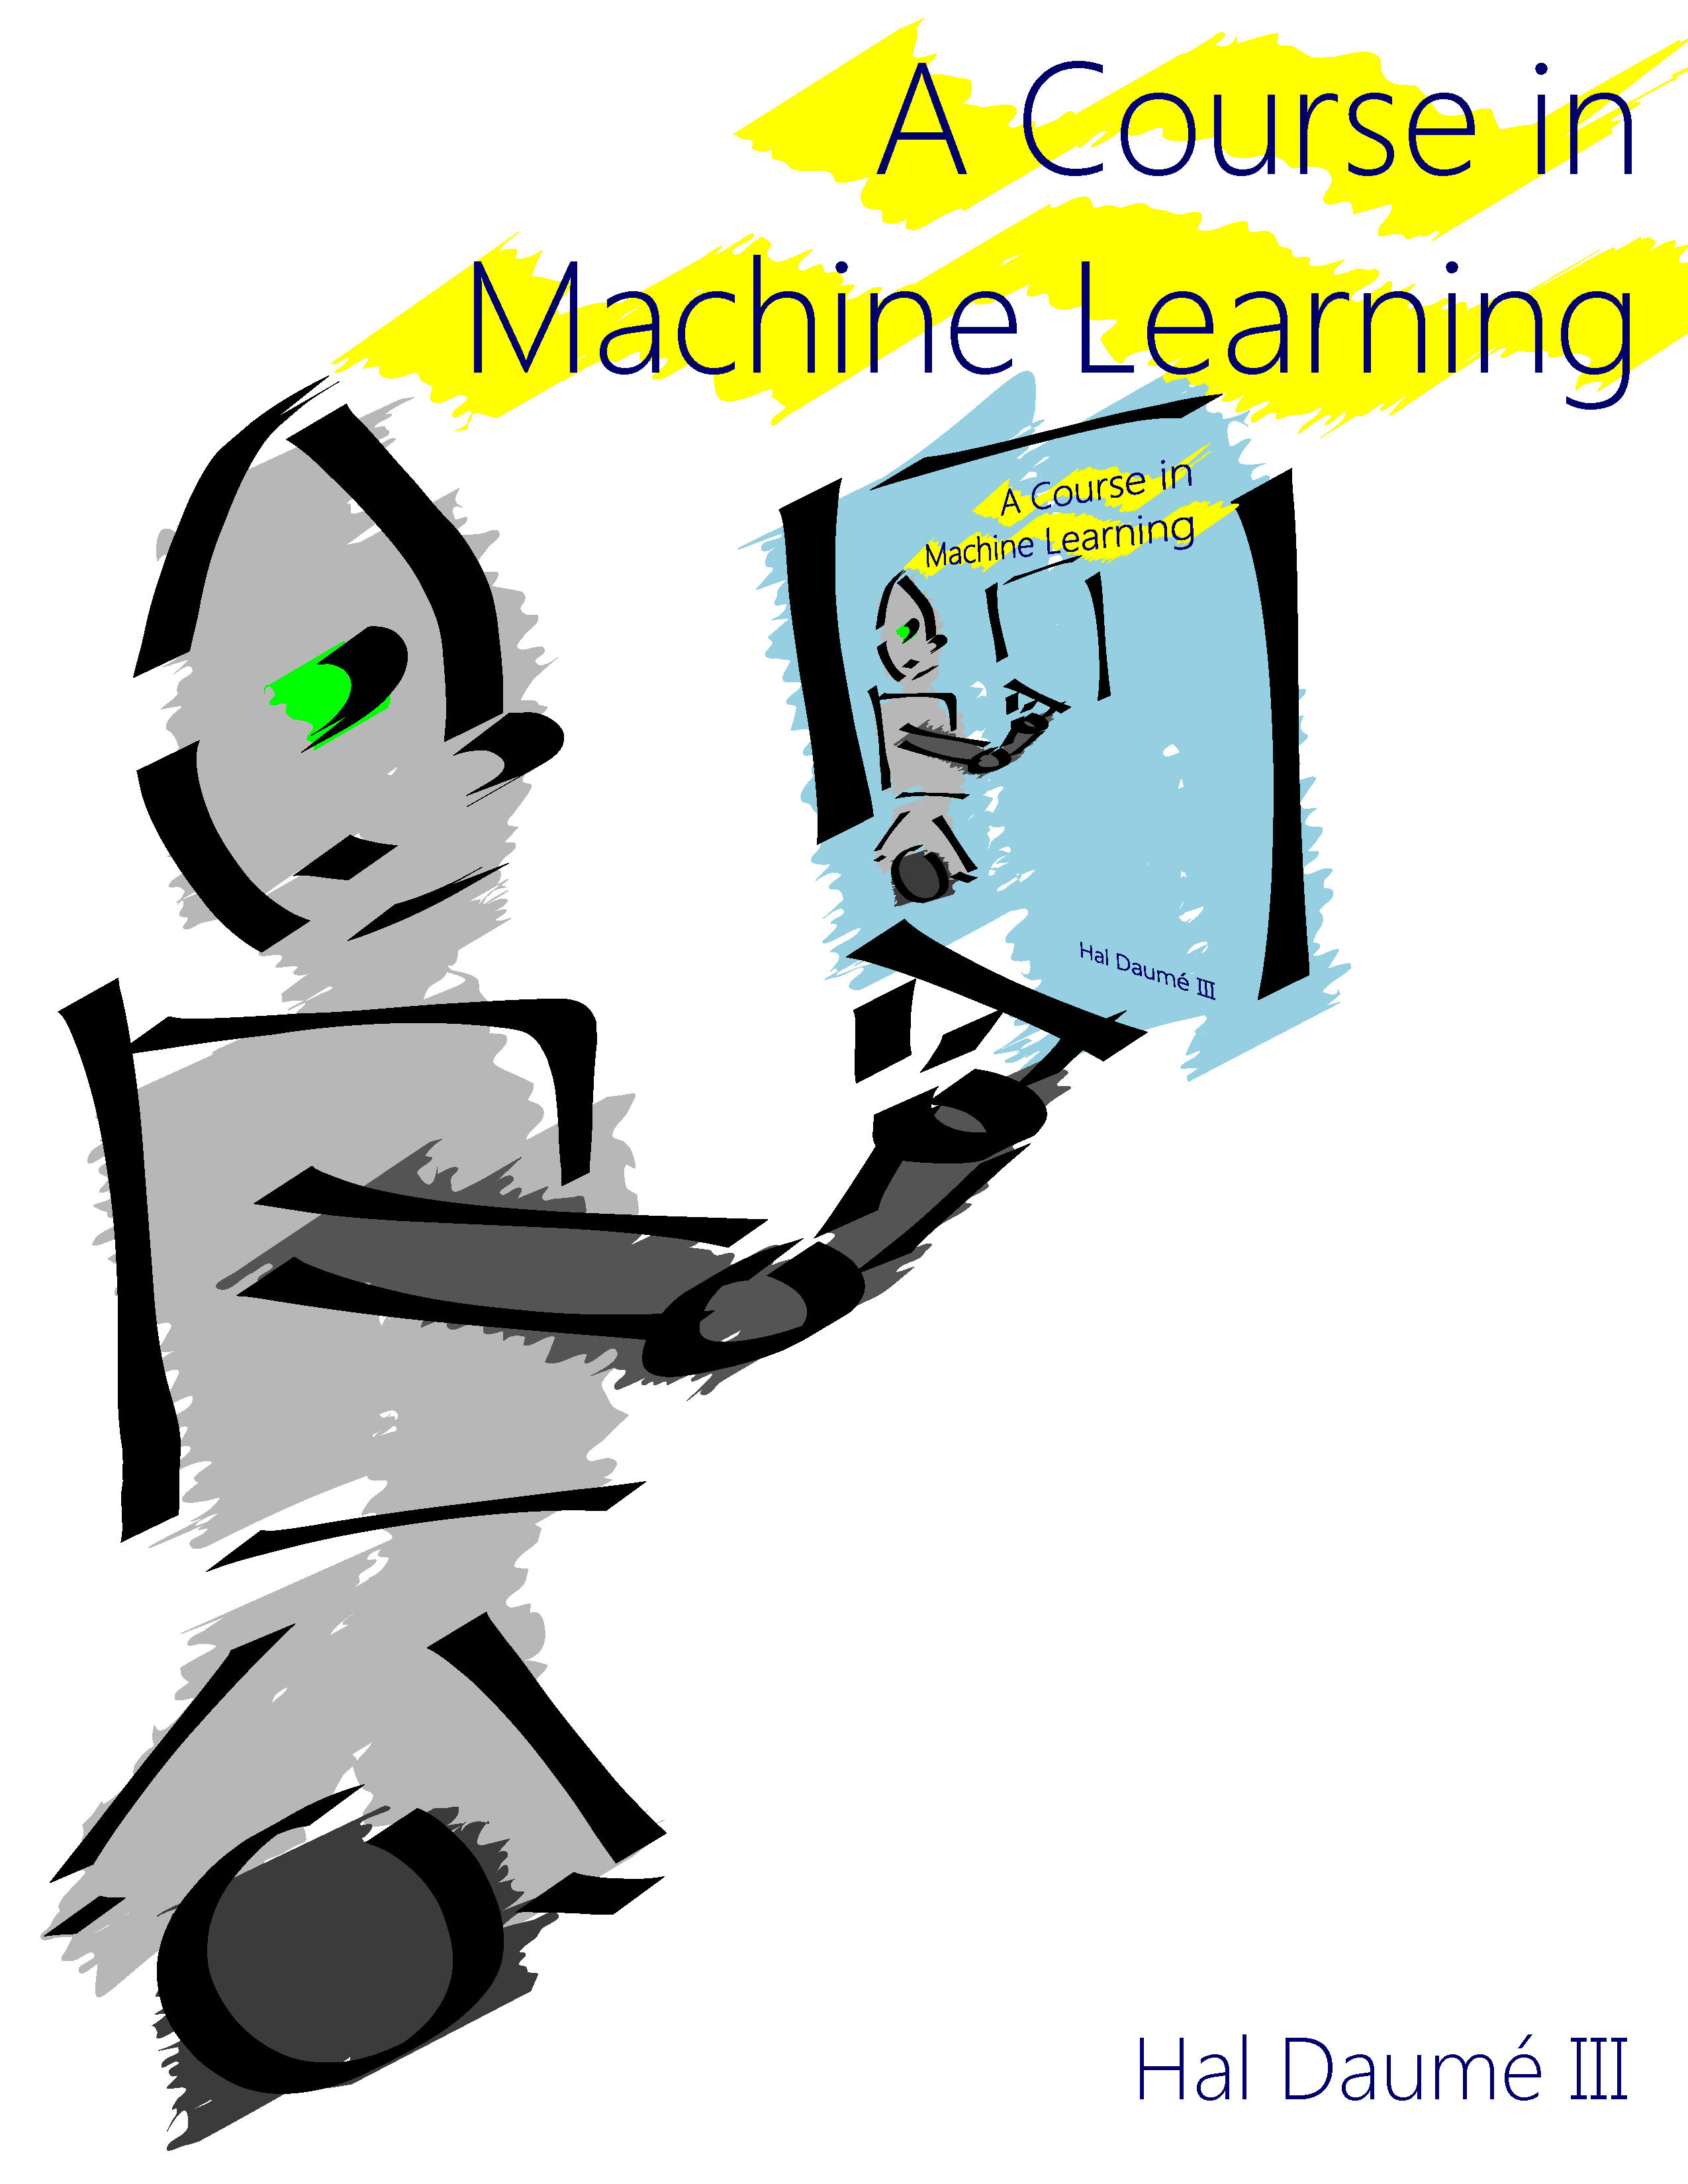 A Course in Machine Learning pdf free download